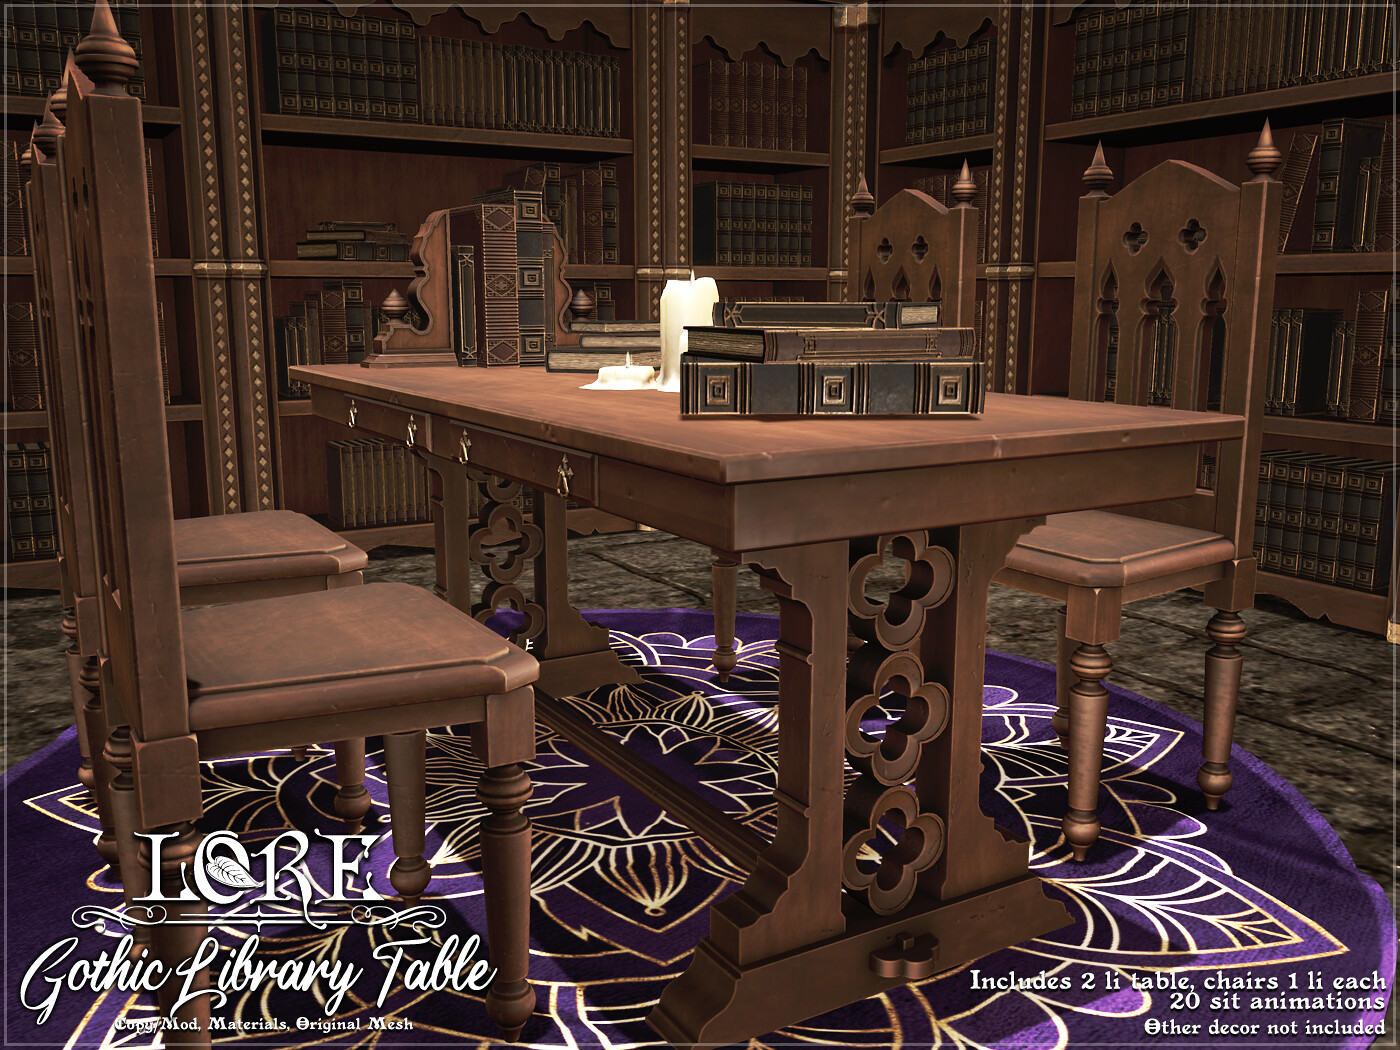 LORE – Gothic Library Table